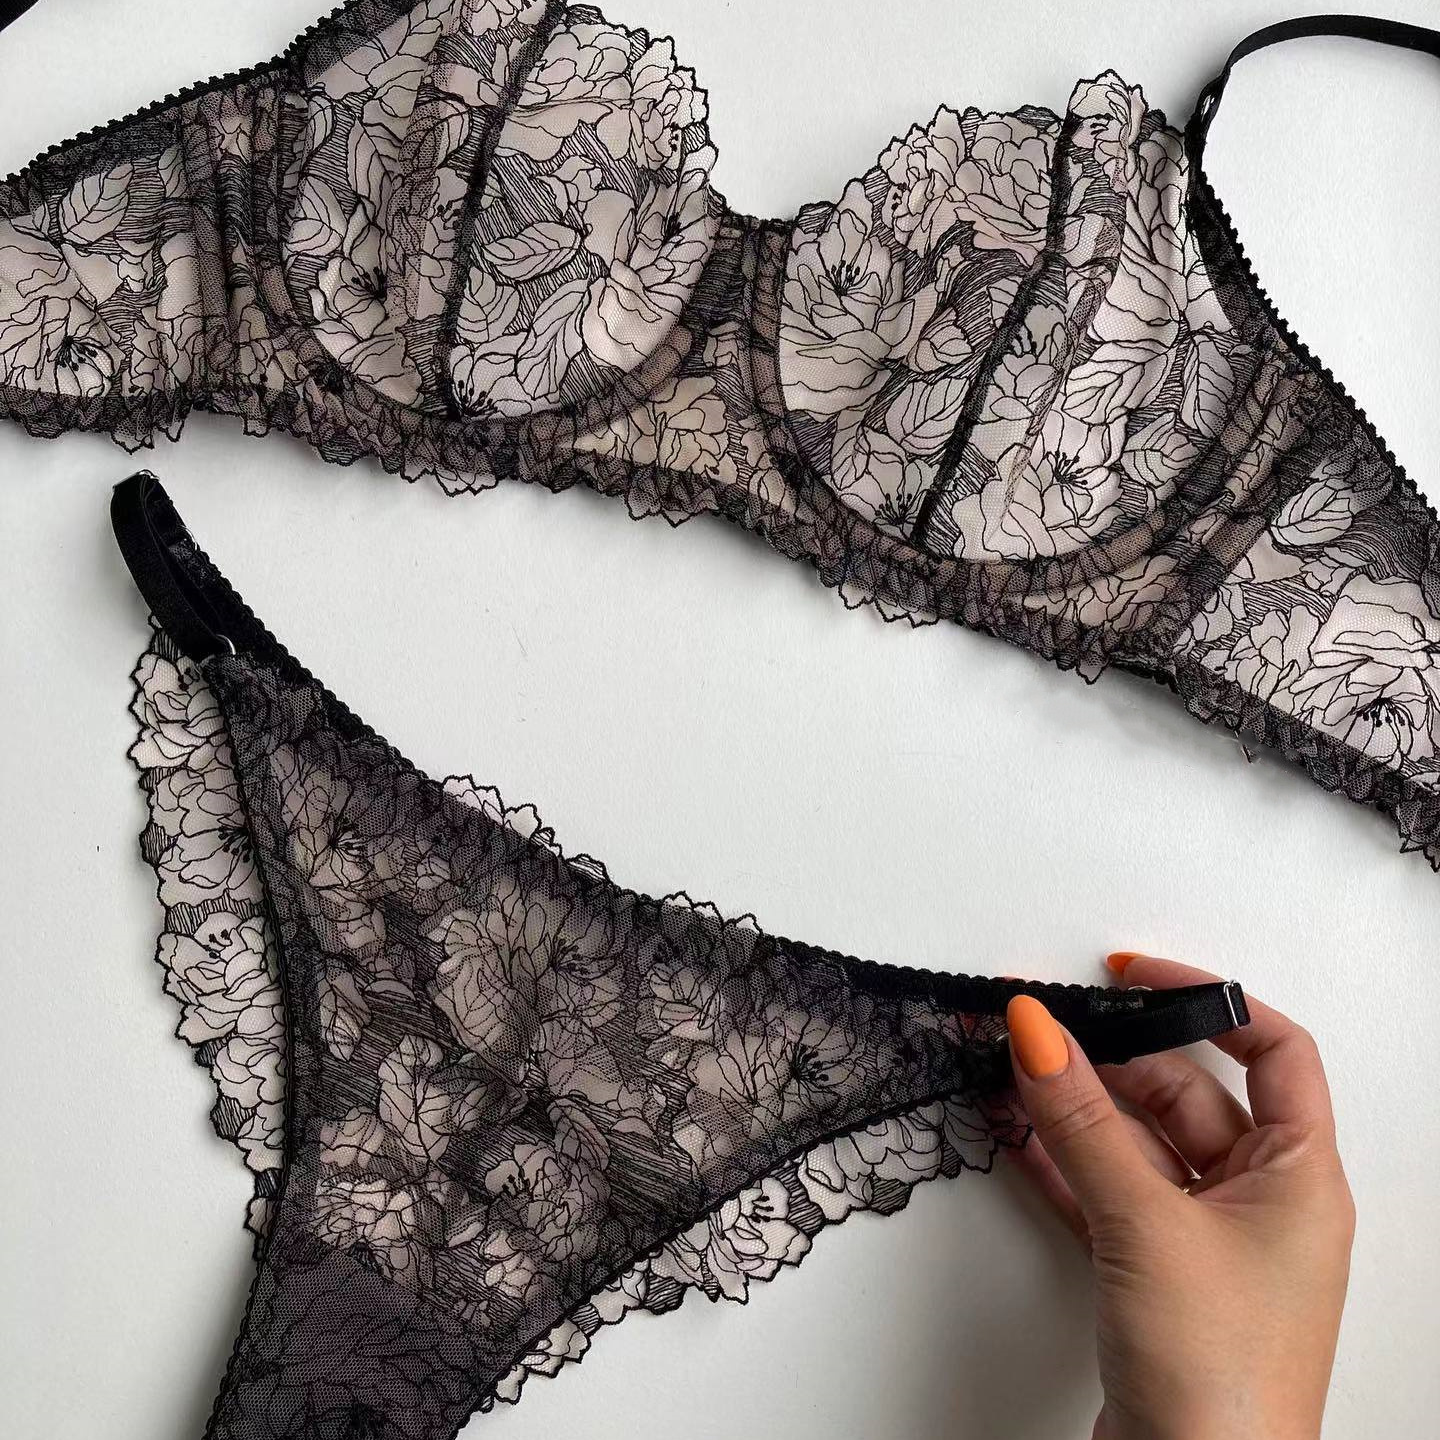 Sheer Mesh Floral Embroidery Lace Sexy Lingerie Set